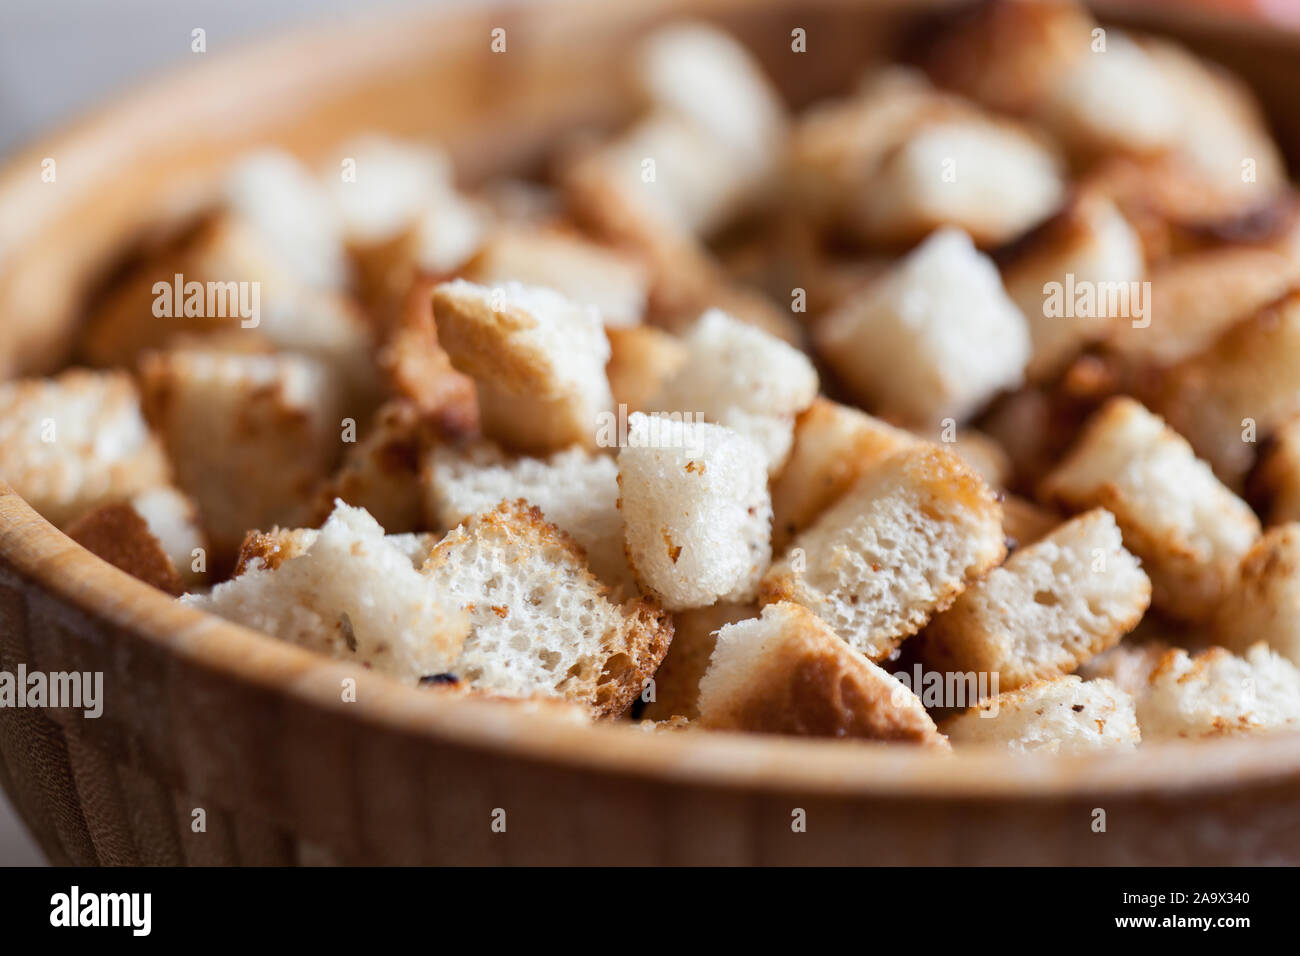 Fried rye crackers on a plate close up. Stock Photo